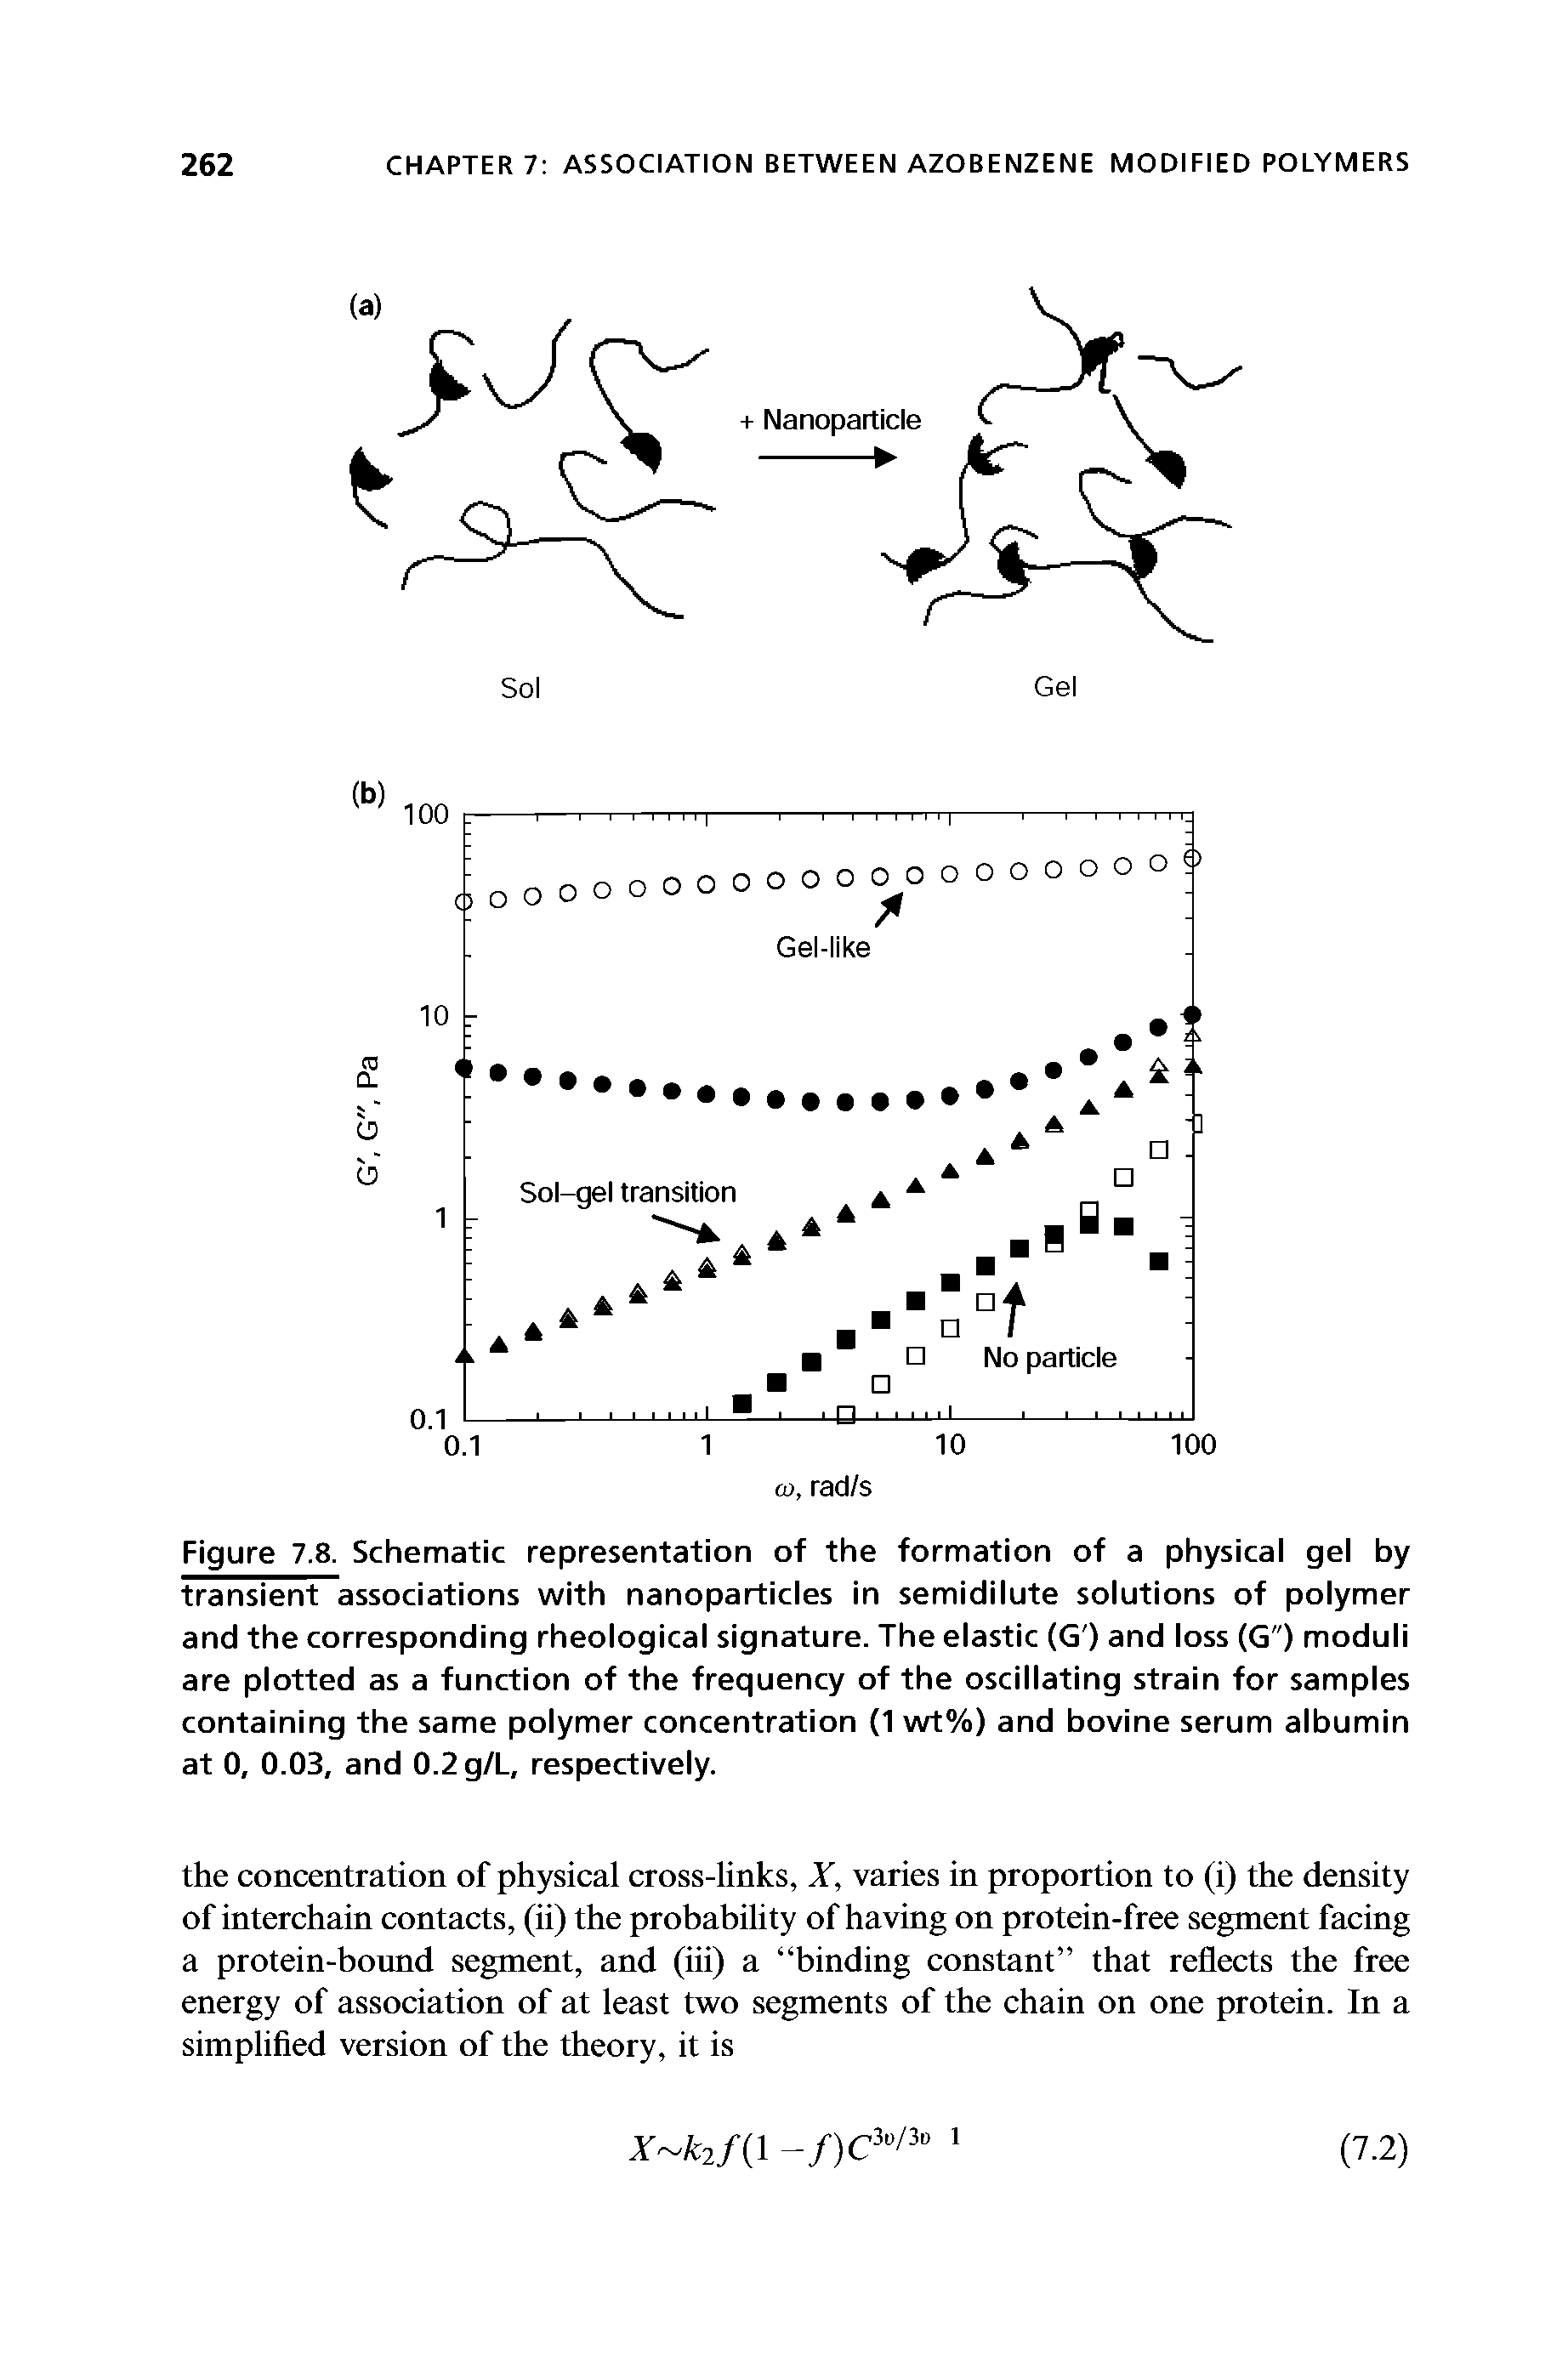 Figure 7.8. Schematic representation of the formation of a physical gel by transient associations with nanoparticies in semidilute solutions of polymer and the corresponding rheoiogicai signature. The eiastic (G ) and loss (G") moduli are piotted as a function of the frequency of the osciiiating strain for samples containing the same polymer concentration (1 wt%) and bovine serum albumin at 0, 0.03, and 0.2 g/L, respectively.